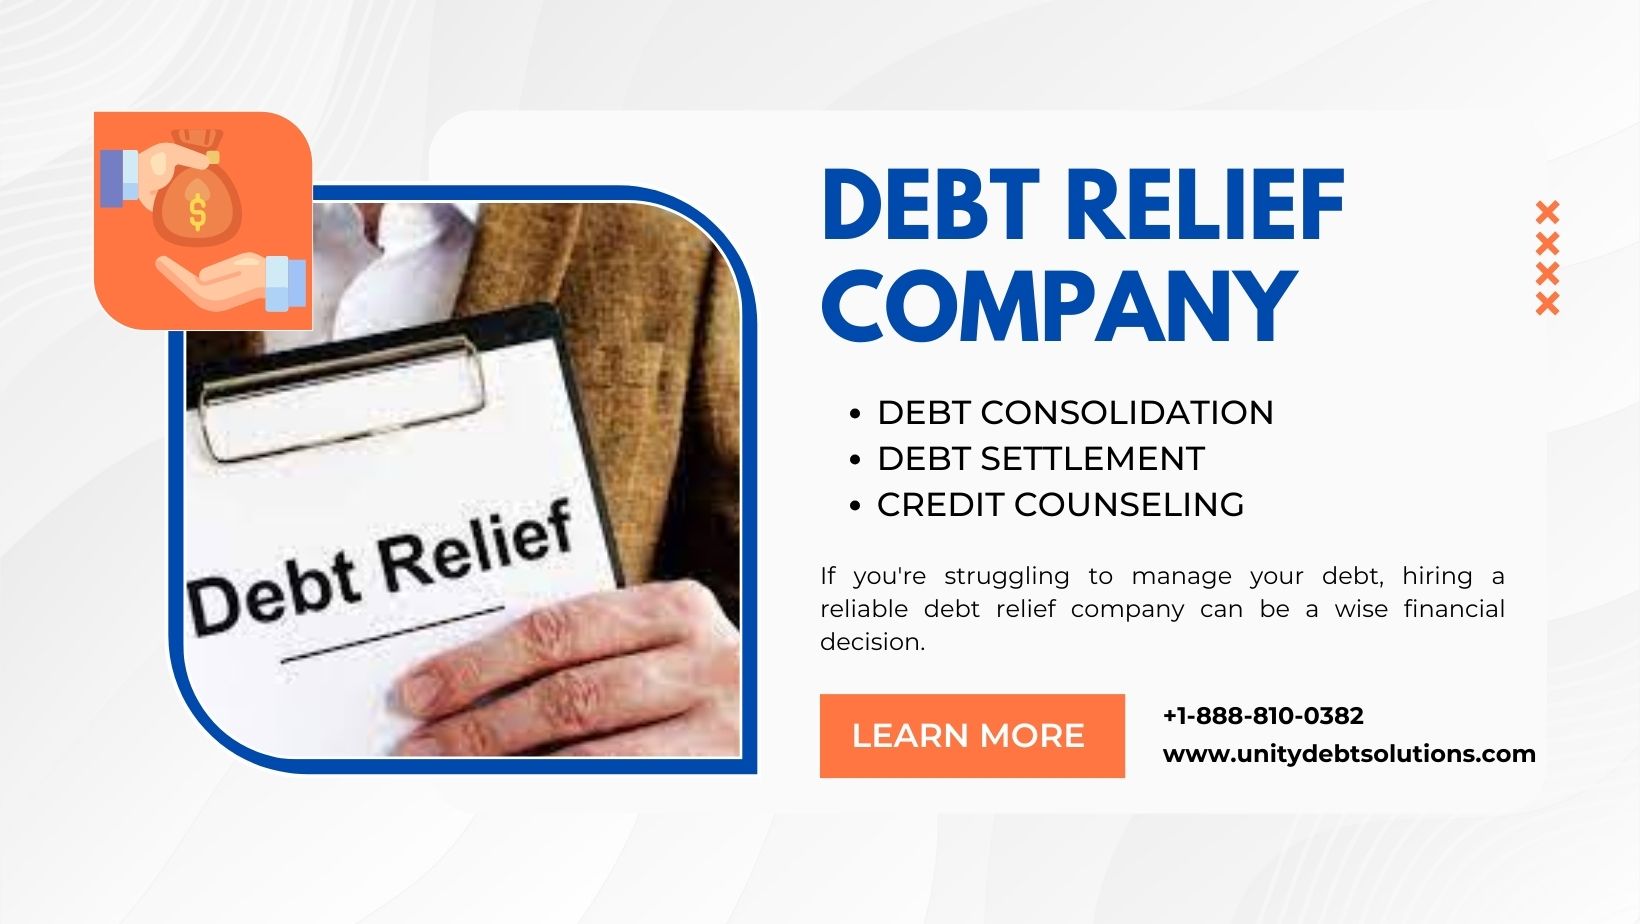 Why Should I Hire a Debt Relief Company?